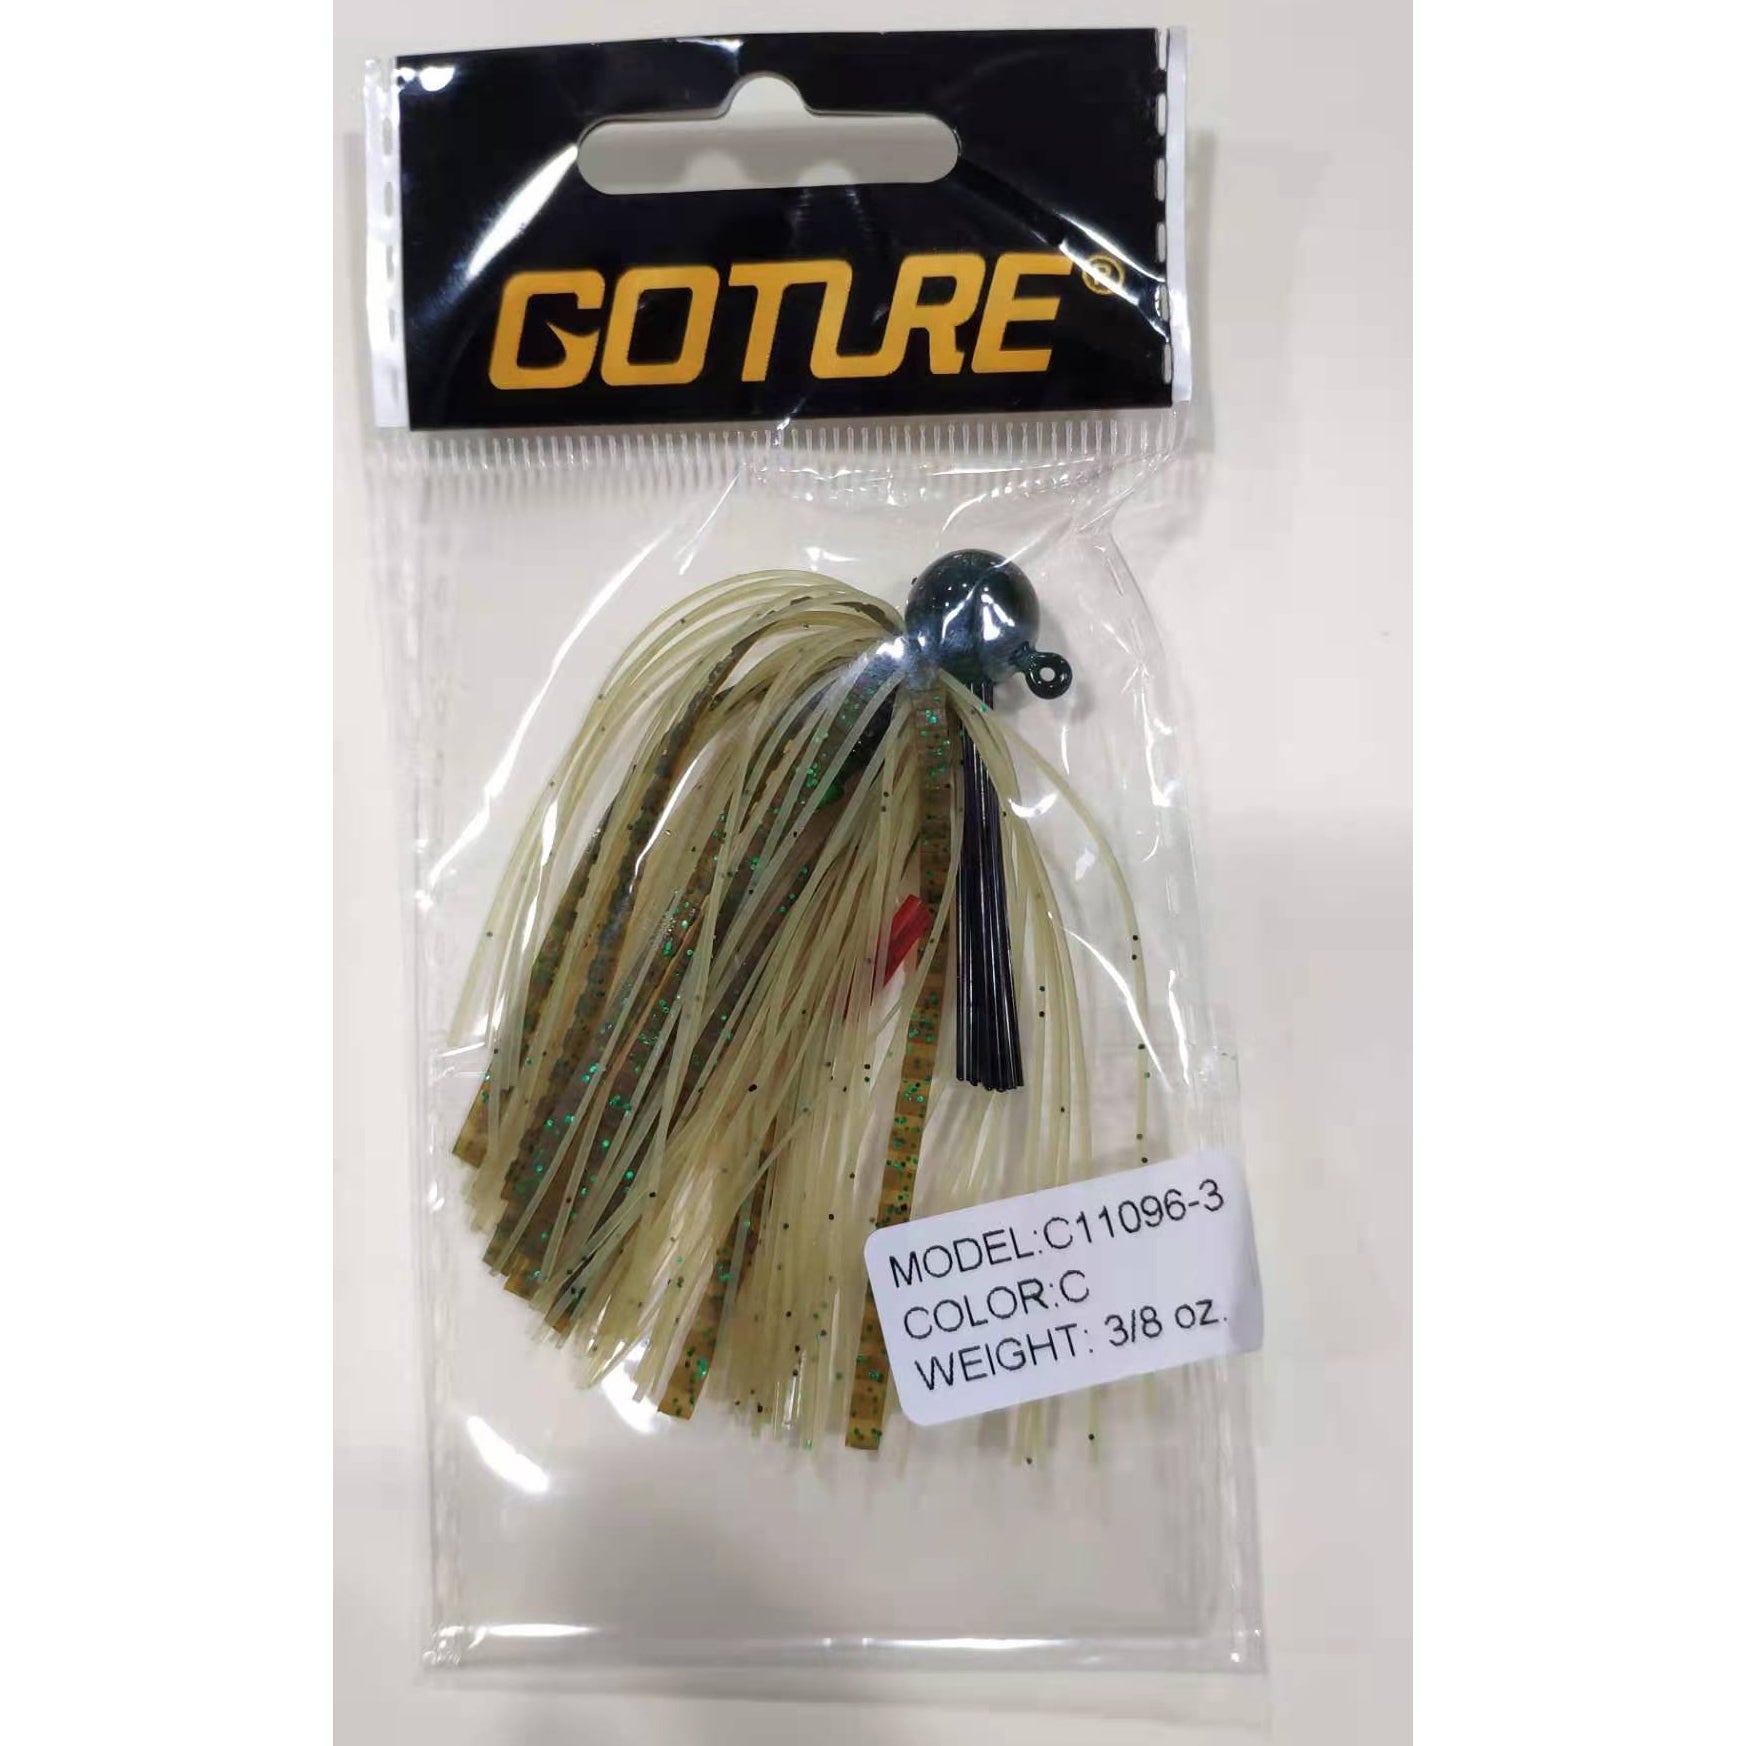 Ultimate Bass Master Jig: Weed Guard Football Jig with Silicone Skirts -  Perfect for Bass Fishing! - C